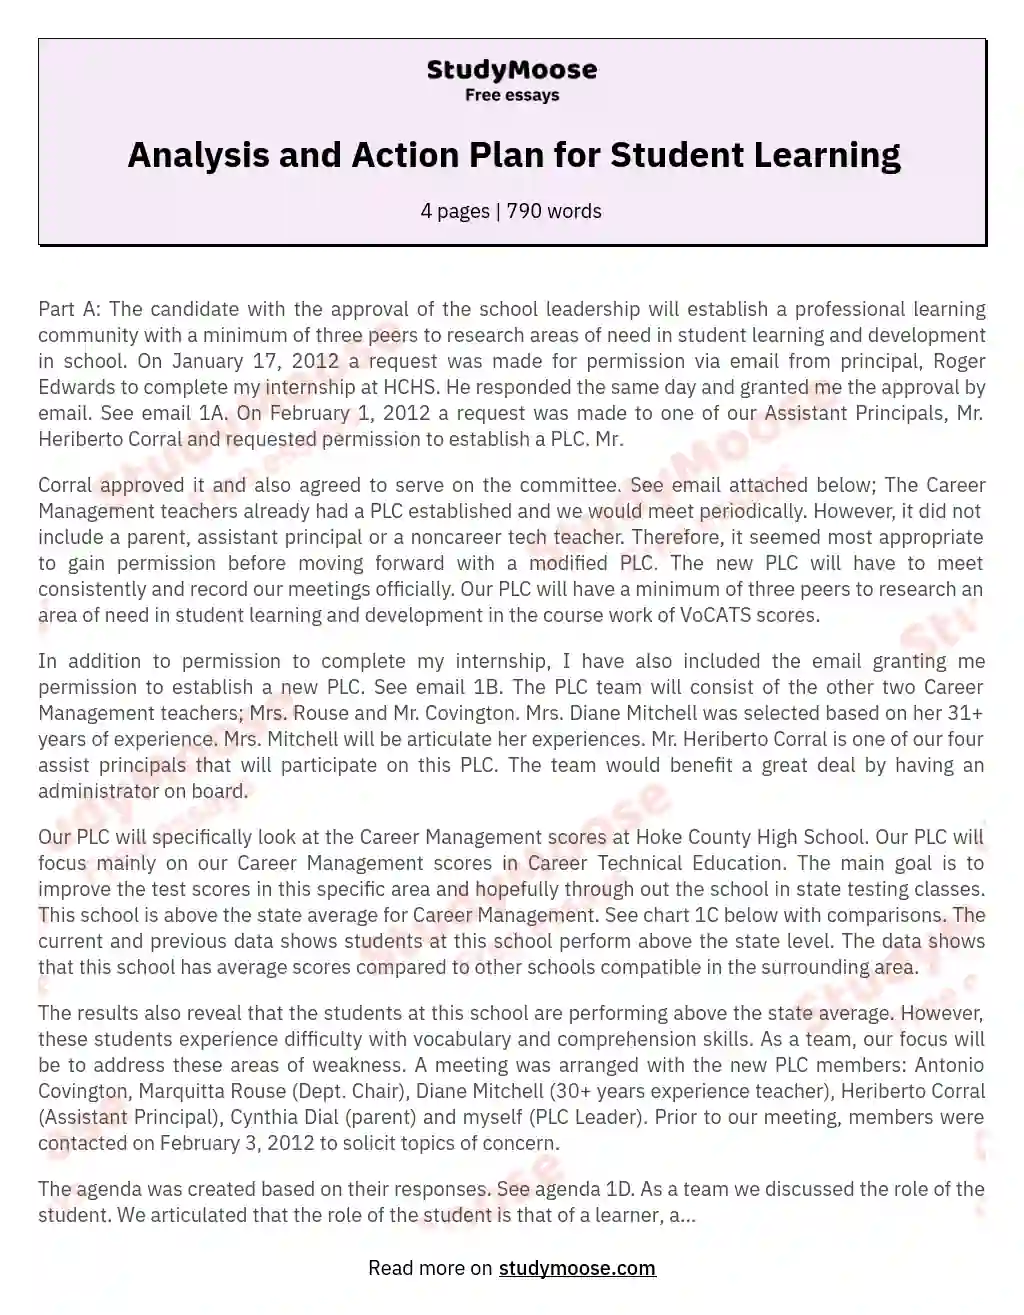 Analysis and Action Plan for Student Learning